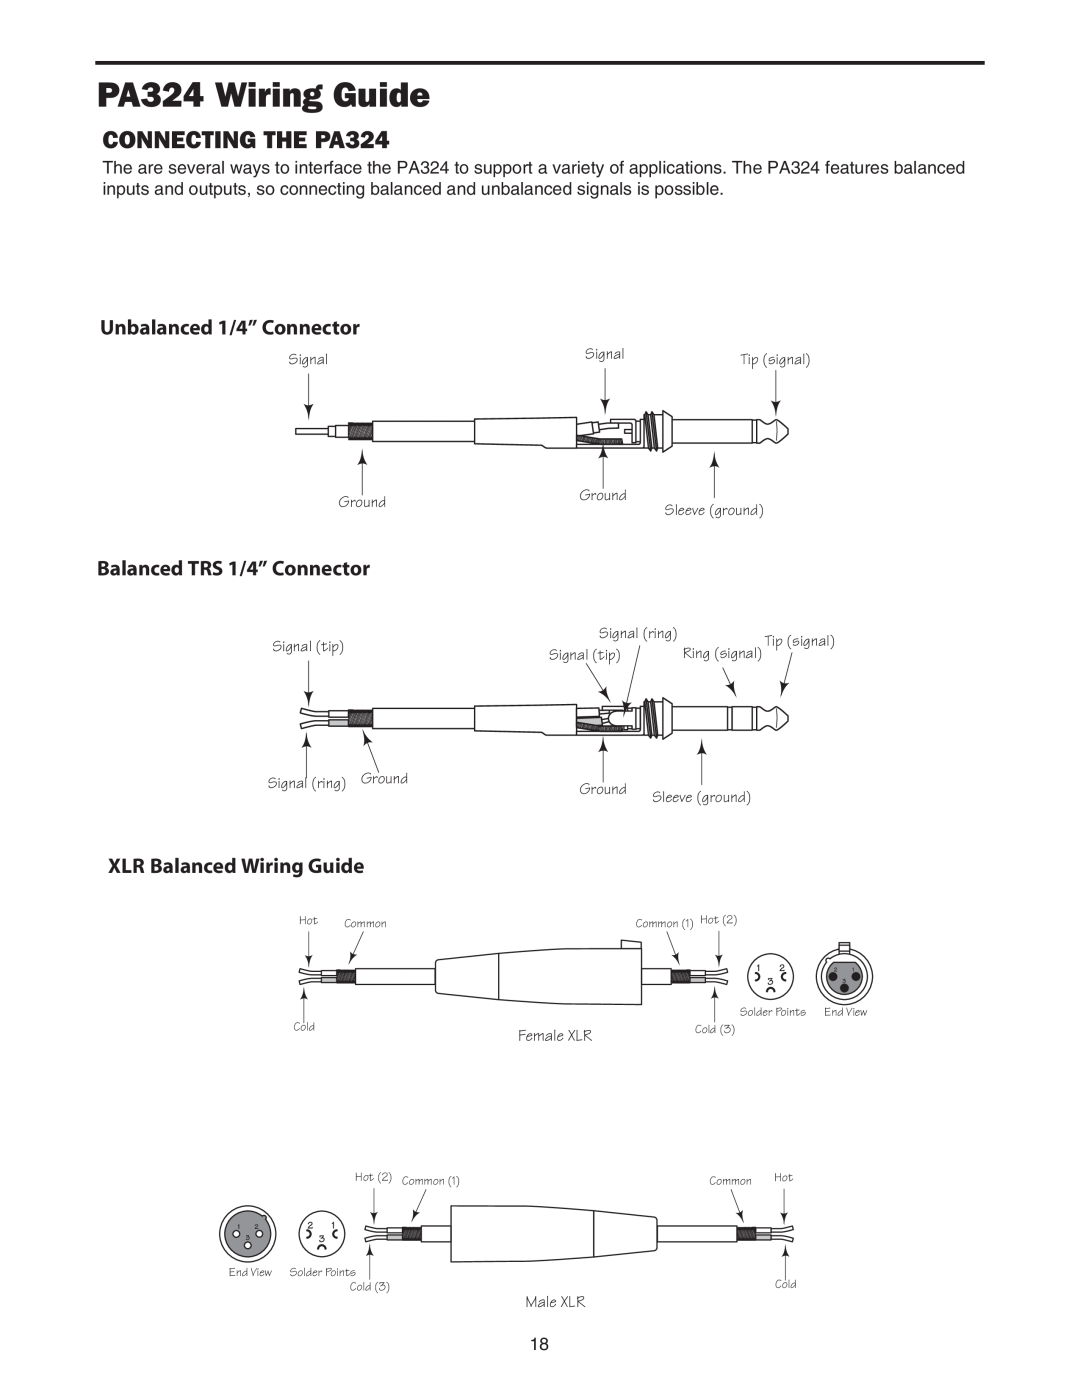 Samson owner manual PA324 Wiring Guide, CONNECTING THE PA324, Unbalanced 1/4” Connector, Balanced TRS 1/4” Connector 